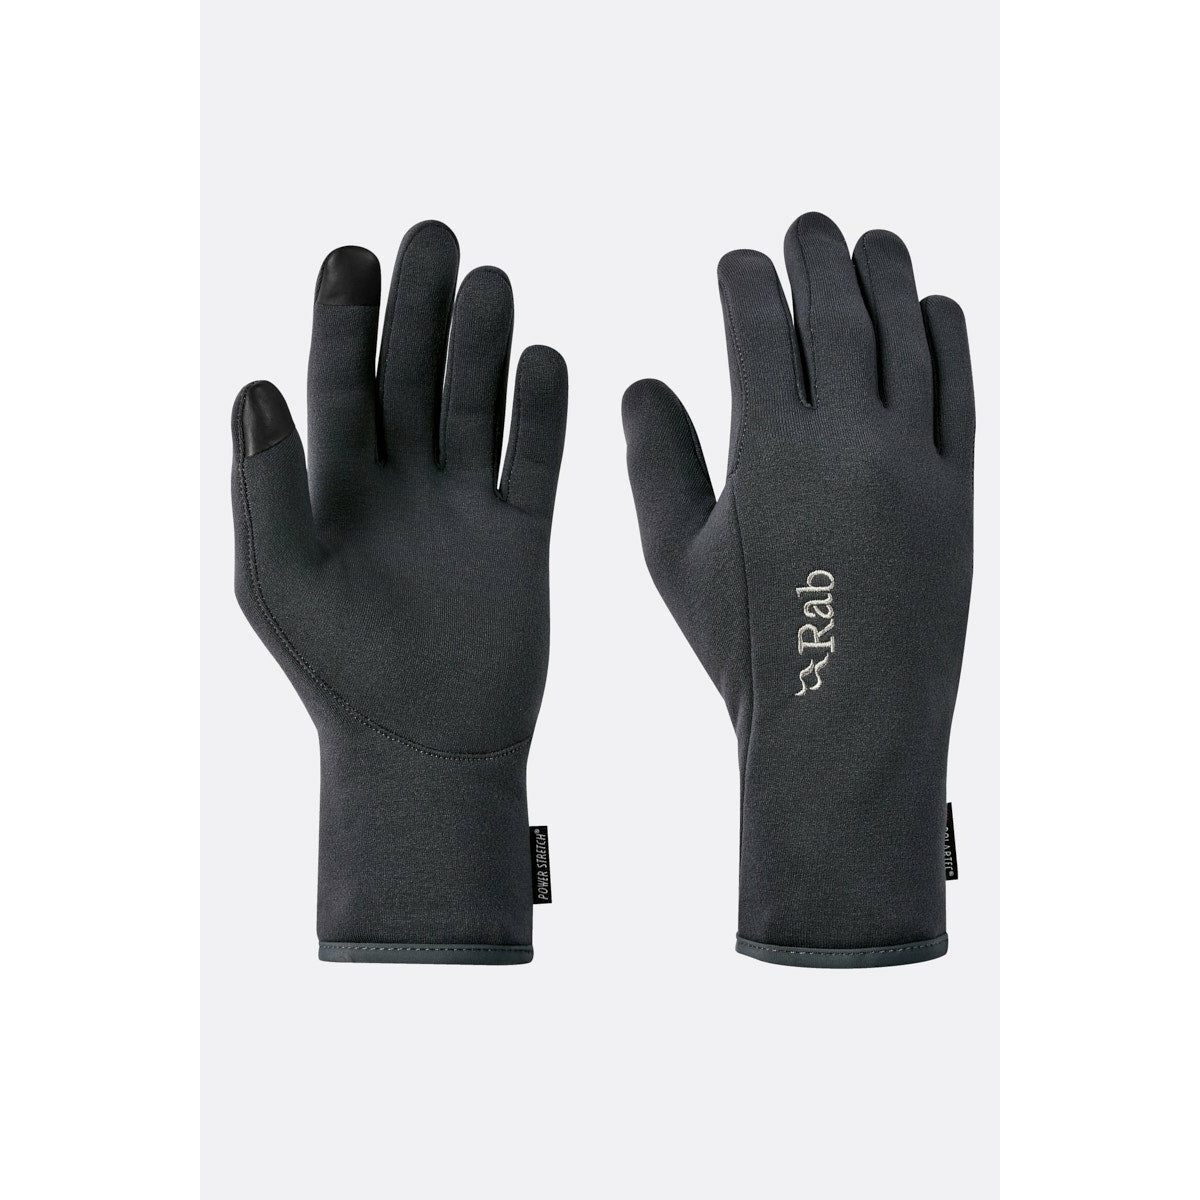 M Power Stretch Contact Glove